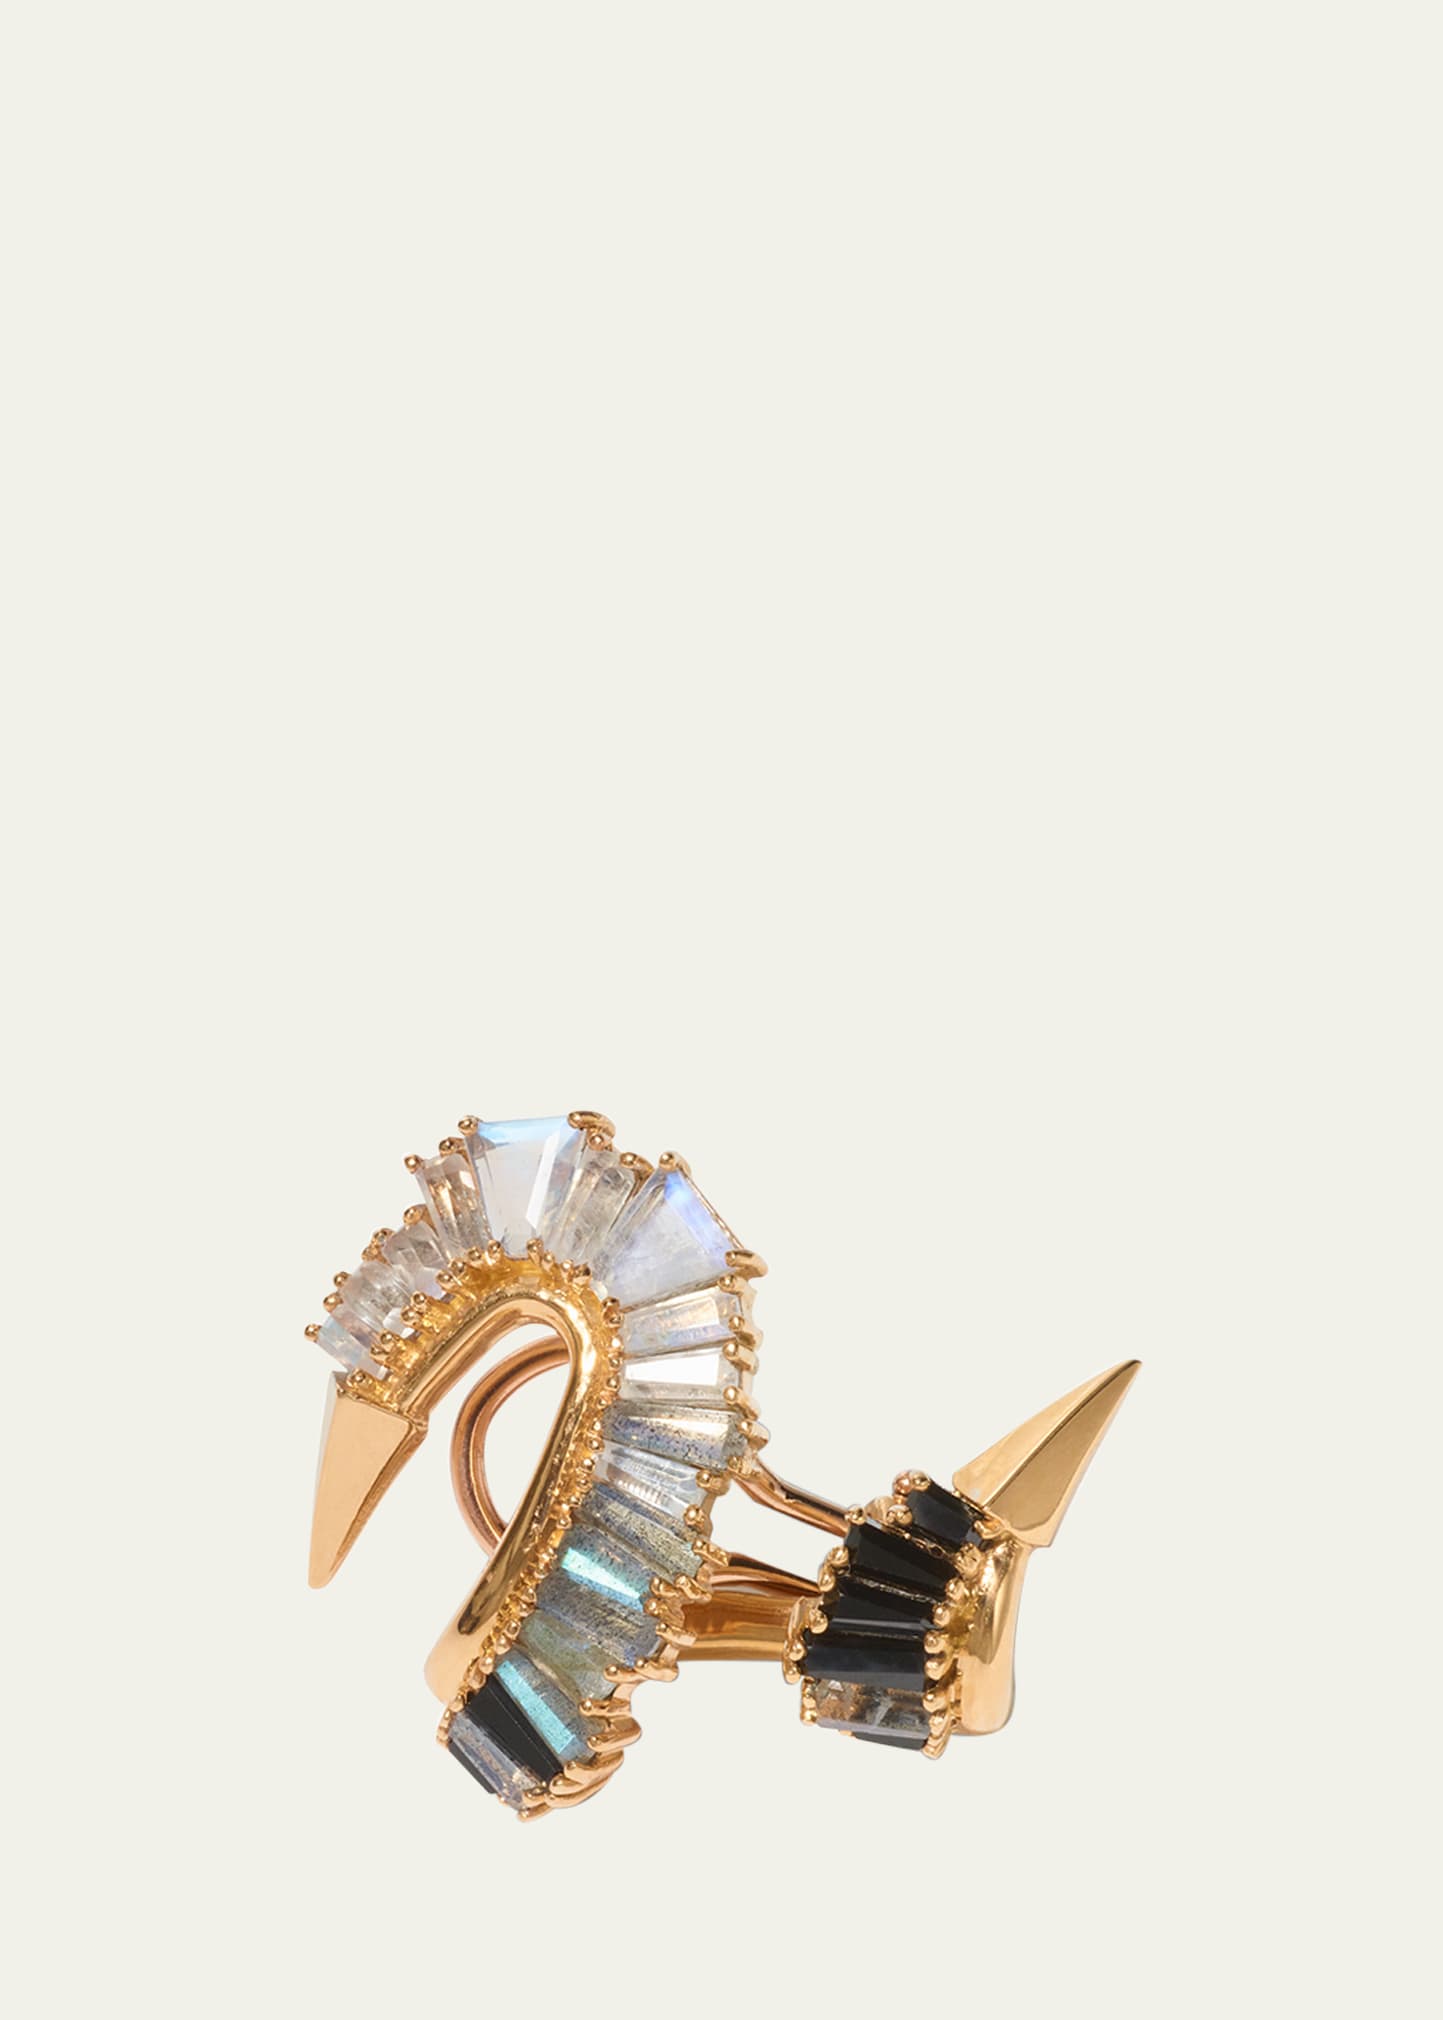 20K Recycled Rose Gold Serpent Ear Cuff with Rainbow Moonstone, Labradorite and Black Spinel, Single